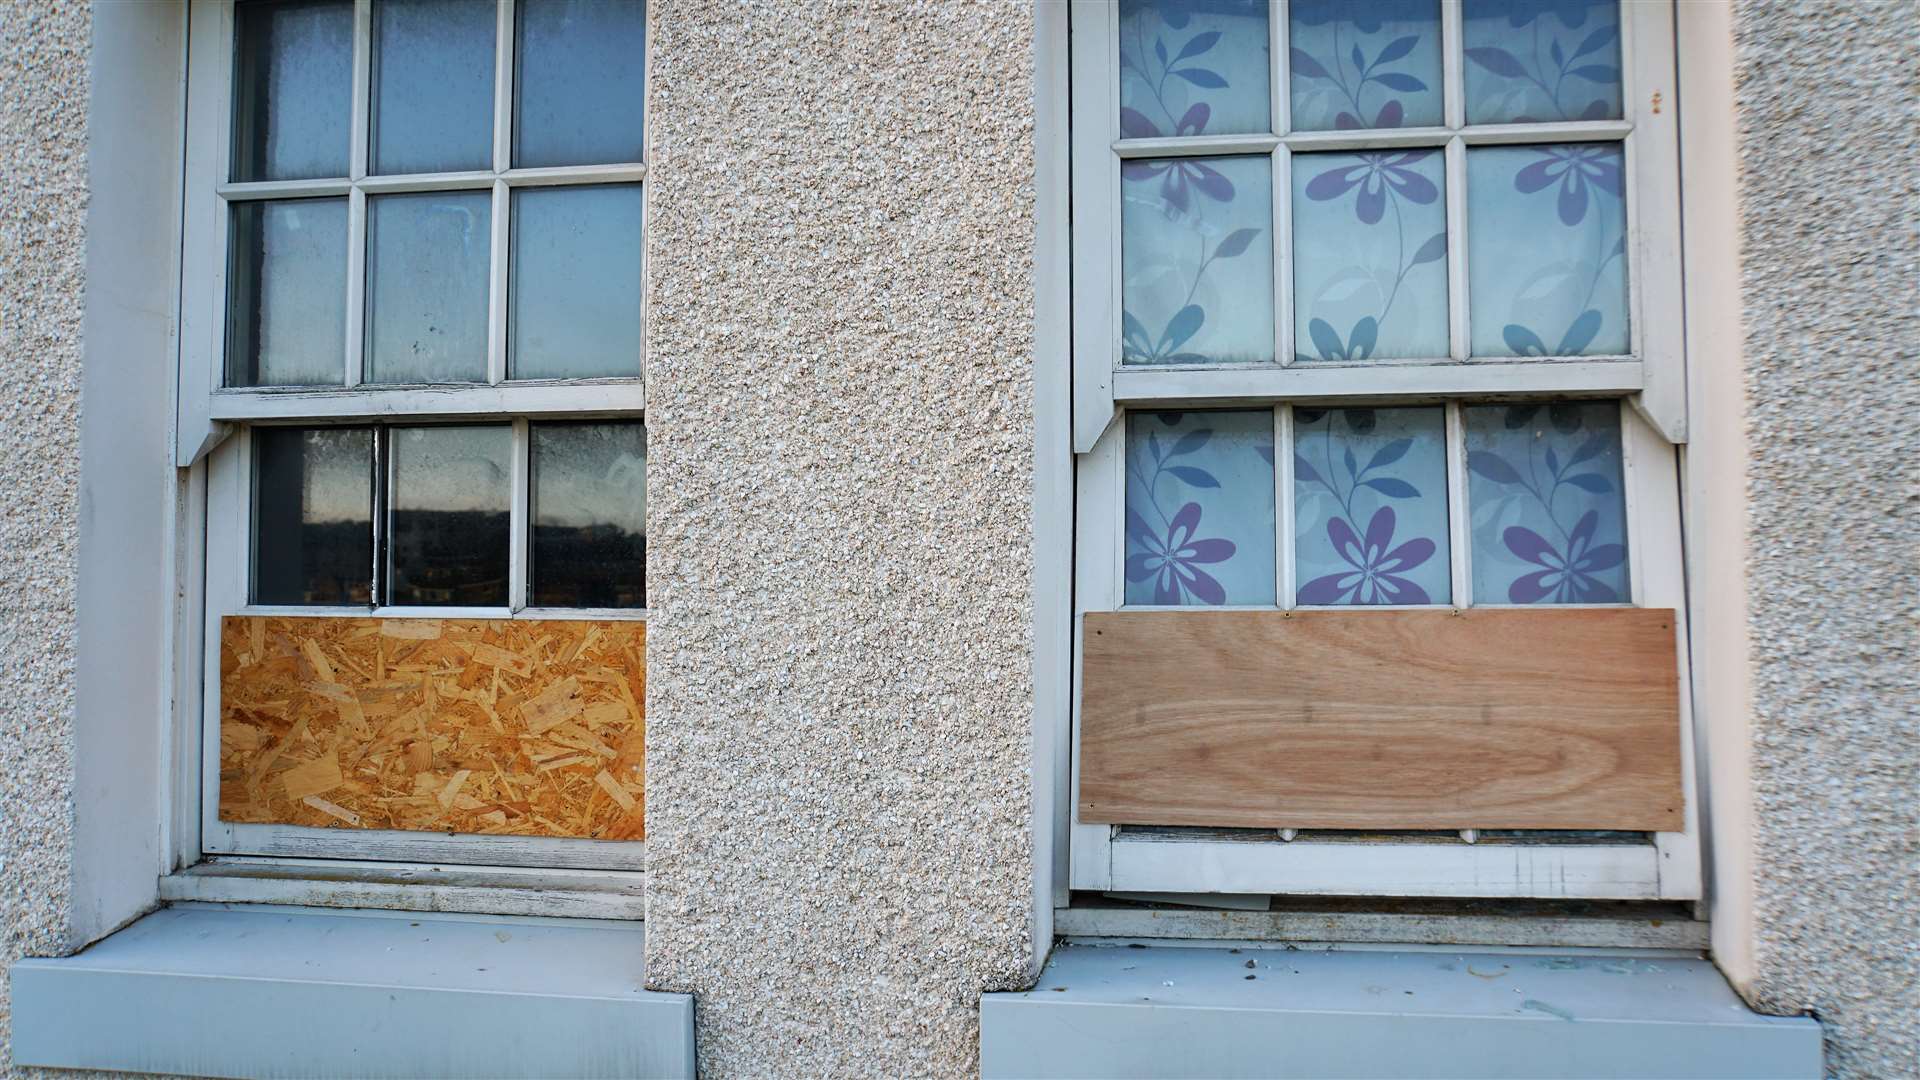 Windows to John Glover's flat have been smashed in and boarded up. Pictures: DGS